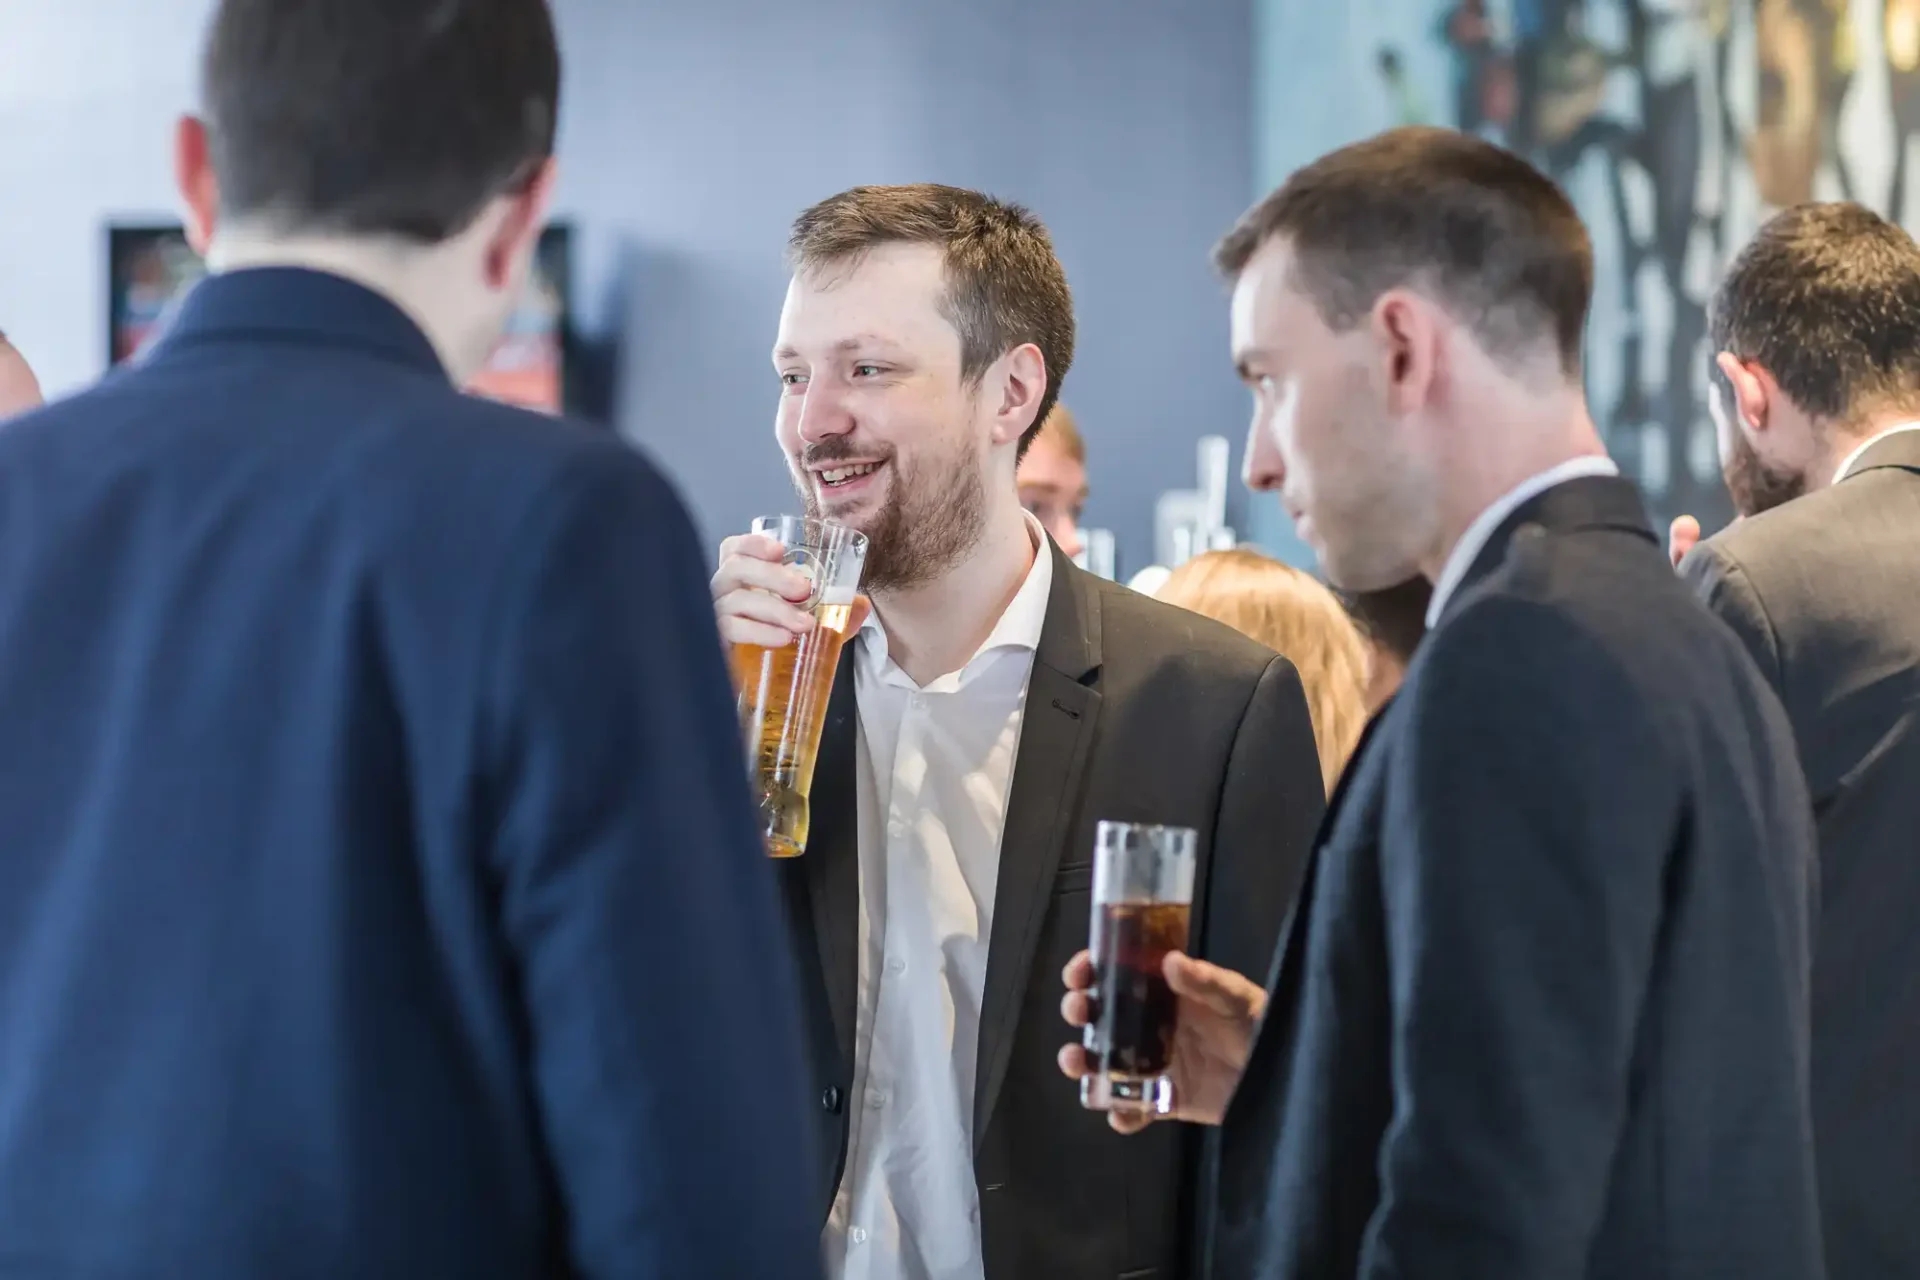 A group of men in business attire, socializing at a networking event with drinks in their hands.